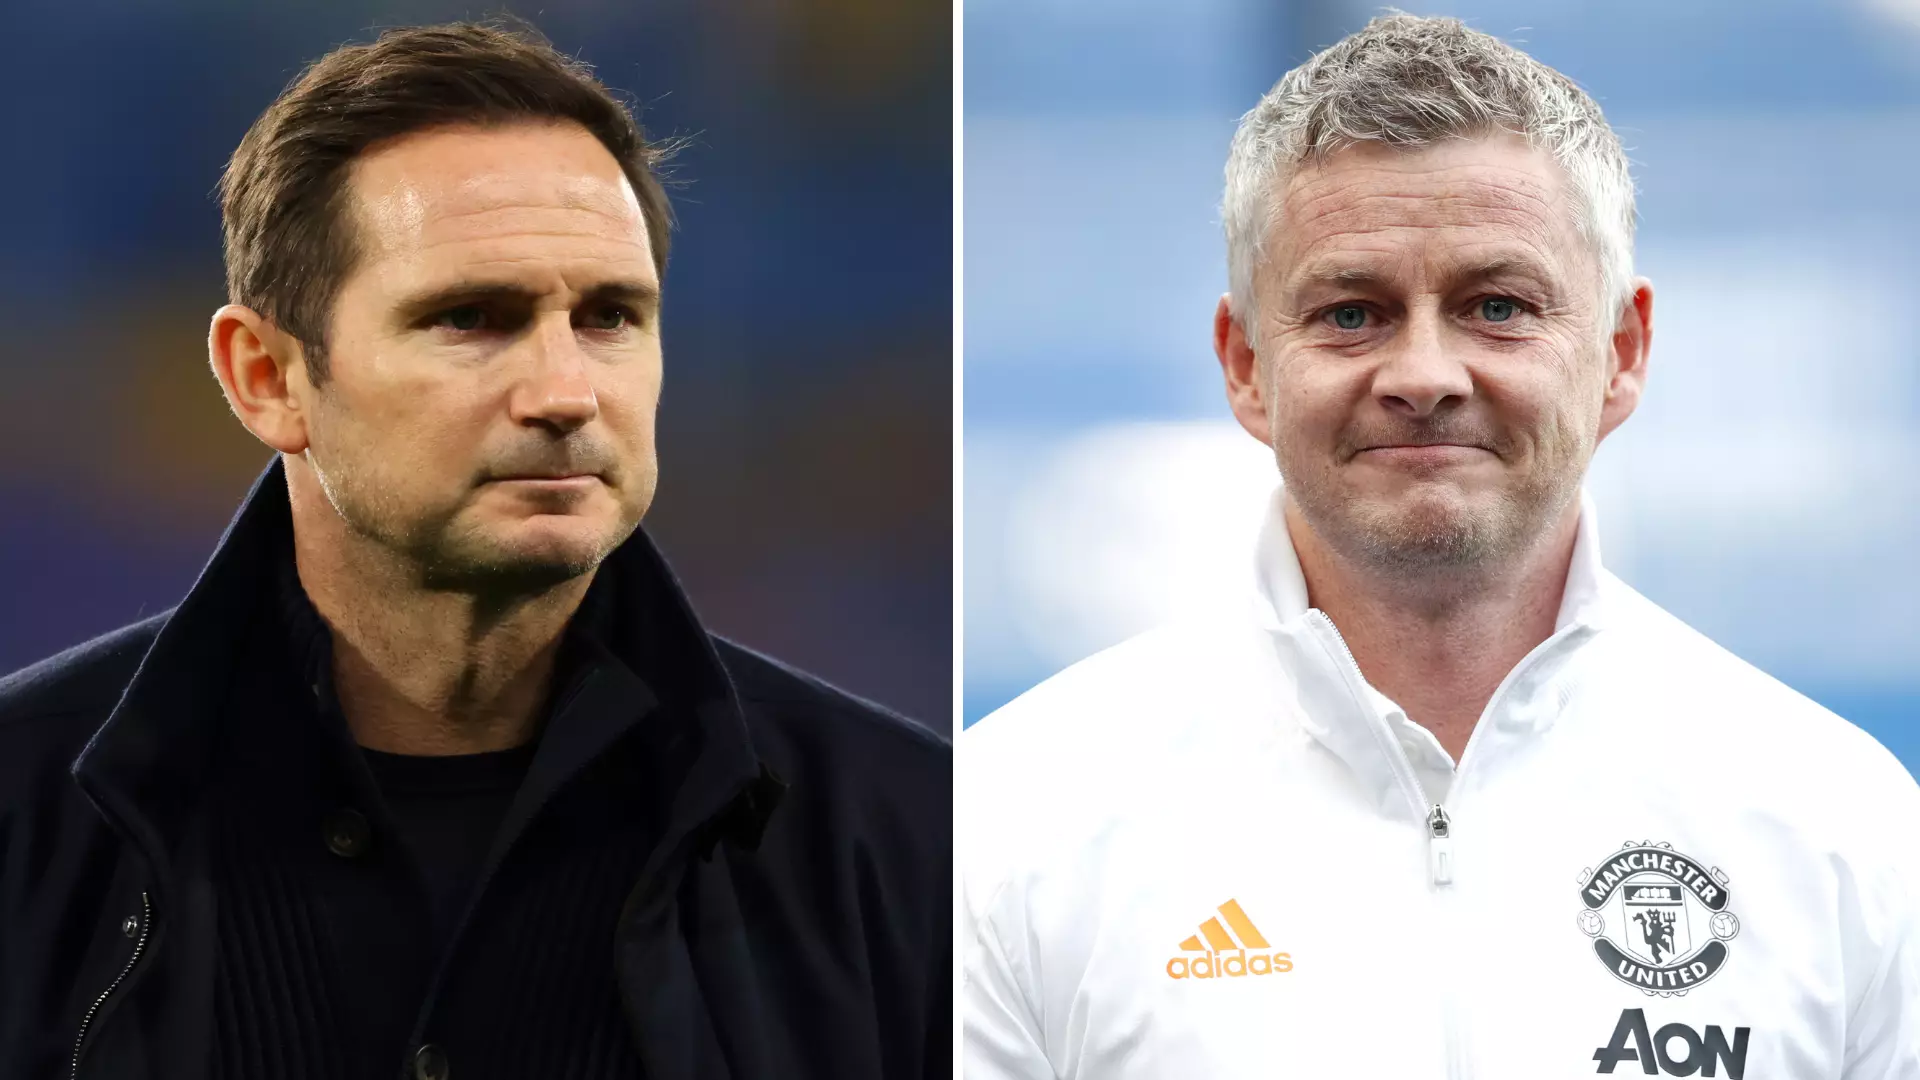 'Man United Boss Ole Gunnar Solskjaer Will Not Reach The Standards Chelsea Manager Frank Lampard Will'